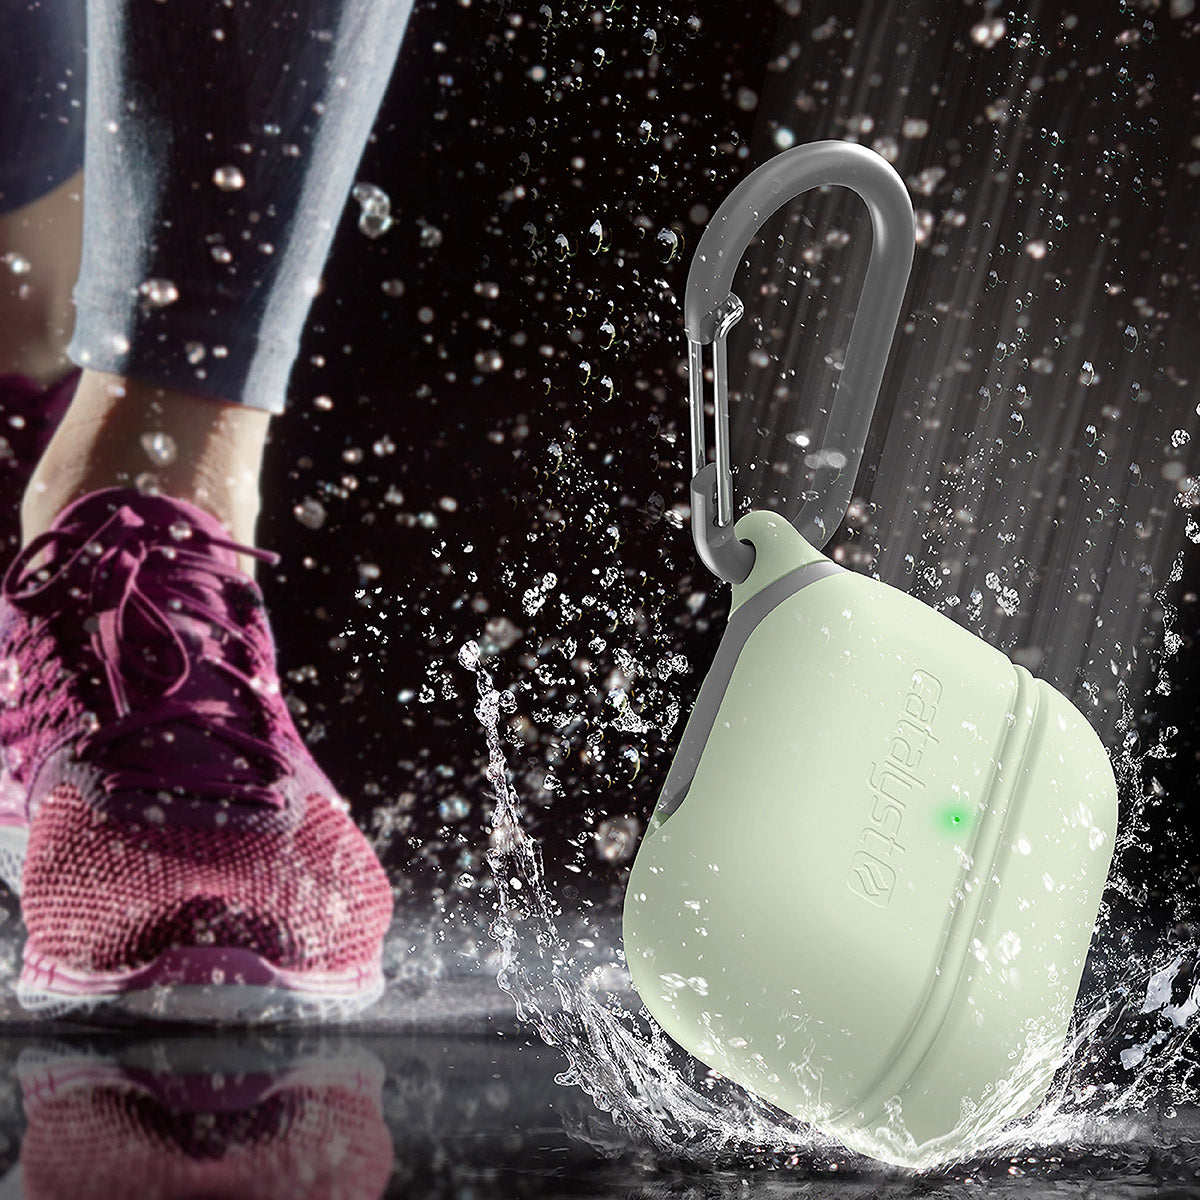 CATAPLAPDPROGITD | catalyst airpods pro gen 2 1 waterproof case carabiner special edition glow in the dark dropped and splashes of water running shoes